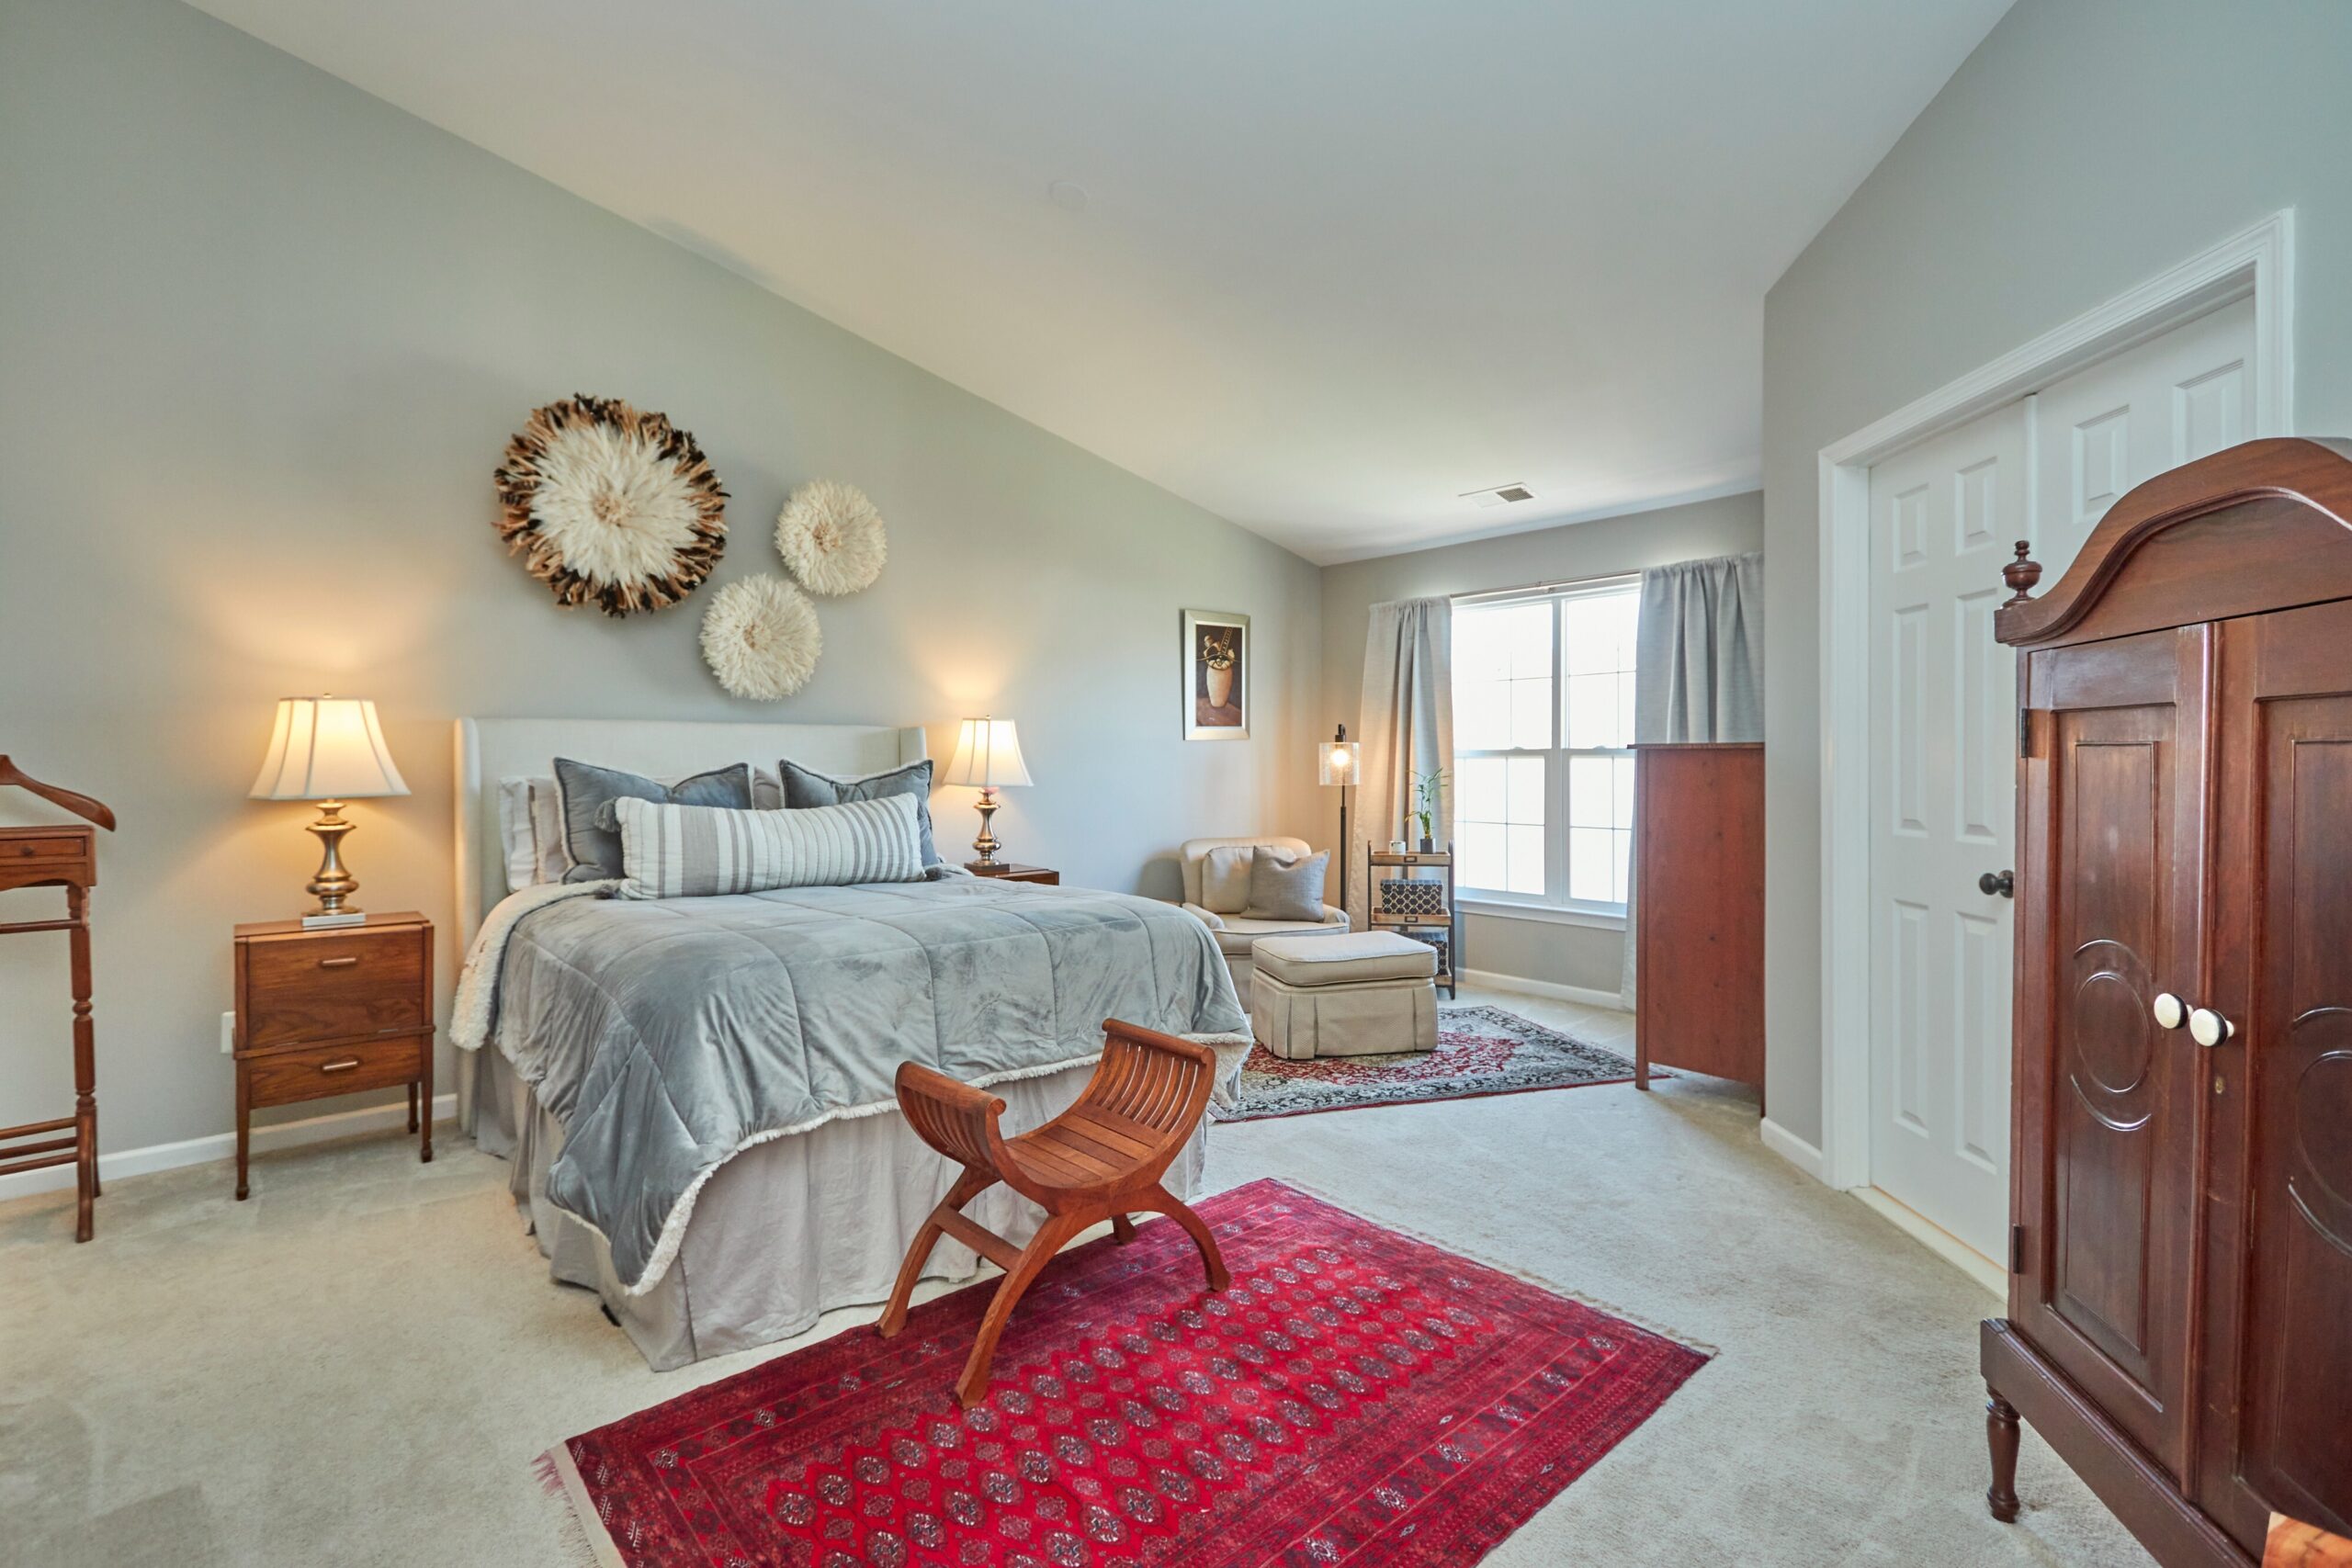 Professional interior photo of 25499 Beresford Drive, Chantilly, Virginia - showing the primary bedroom with vaulted ceiling, sitting area, and french doors to the bathroom